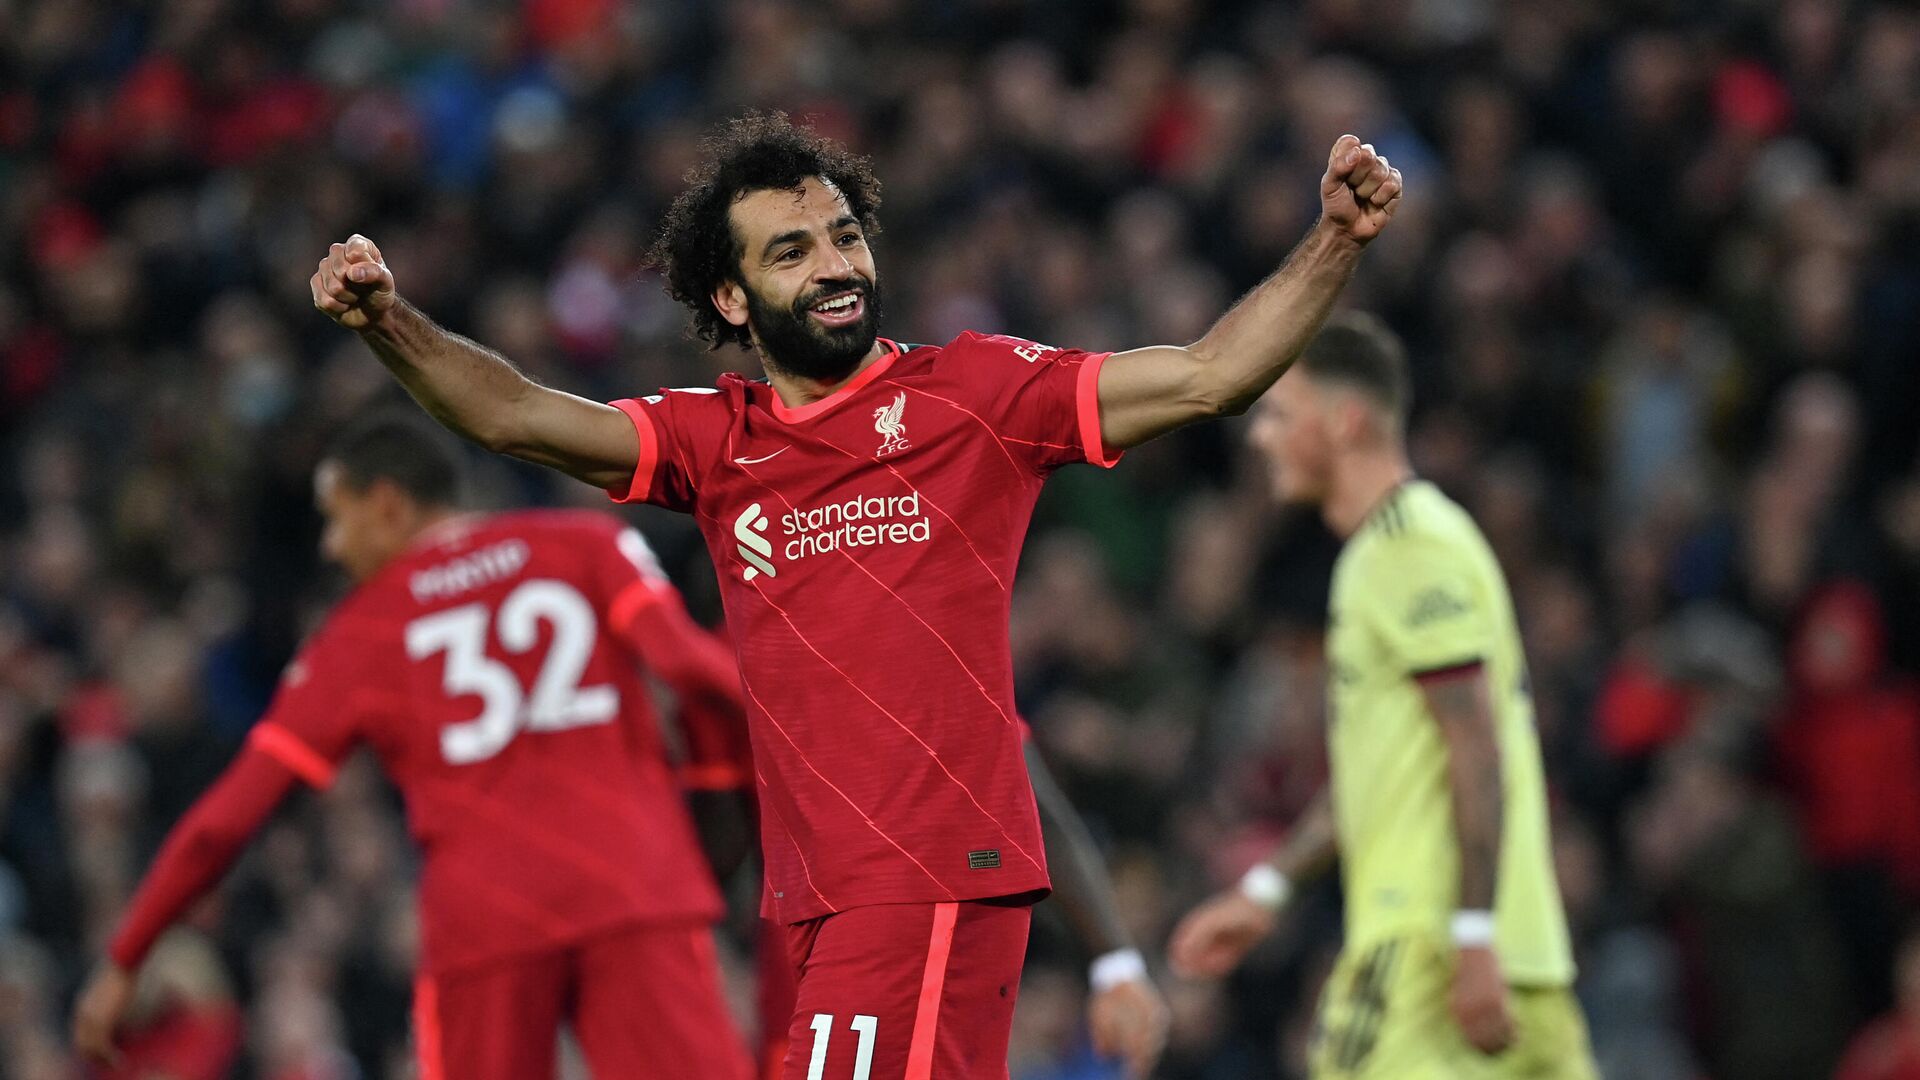 Liverpool's Egyptian midfielder Mohamed Salah celebrates scoring their third goal during the English Premier League football match between Liverpool and Arsenal at Anfield in Liverpool, north west England on November 20, 2021. (Photo by Paul ELLIS / AFP) / RESTRICTED TO EDITORIAL USE. No use with unauthorized audio, video, data, fixture lists, club/league logos or 'live' services. Online in-match use limited to 120 images. An additional 40 images may be used in extra time. No video emulation. Social media in-match use limited to 120 images. An additional 40 images may be used in extra time. No use in betting publications, games or single club/league/player publications. /  - РИА Новости, 1920, 20.11.2021